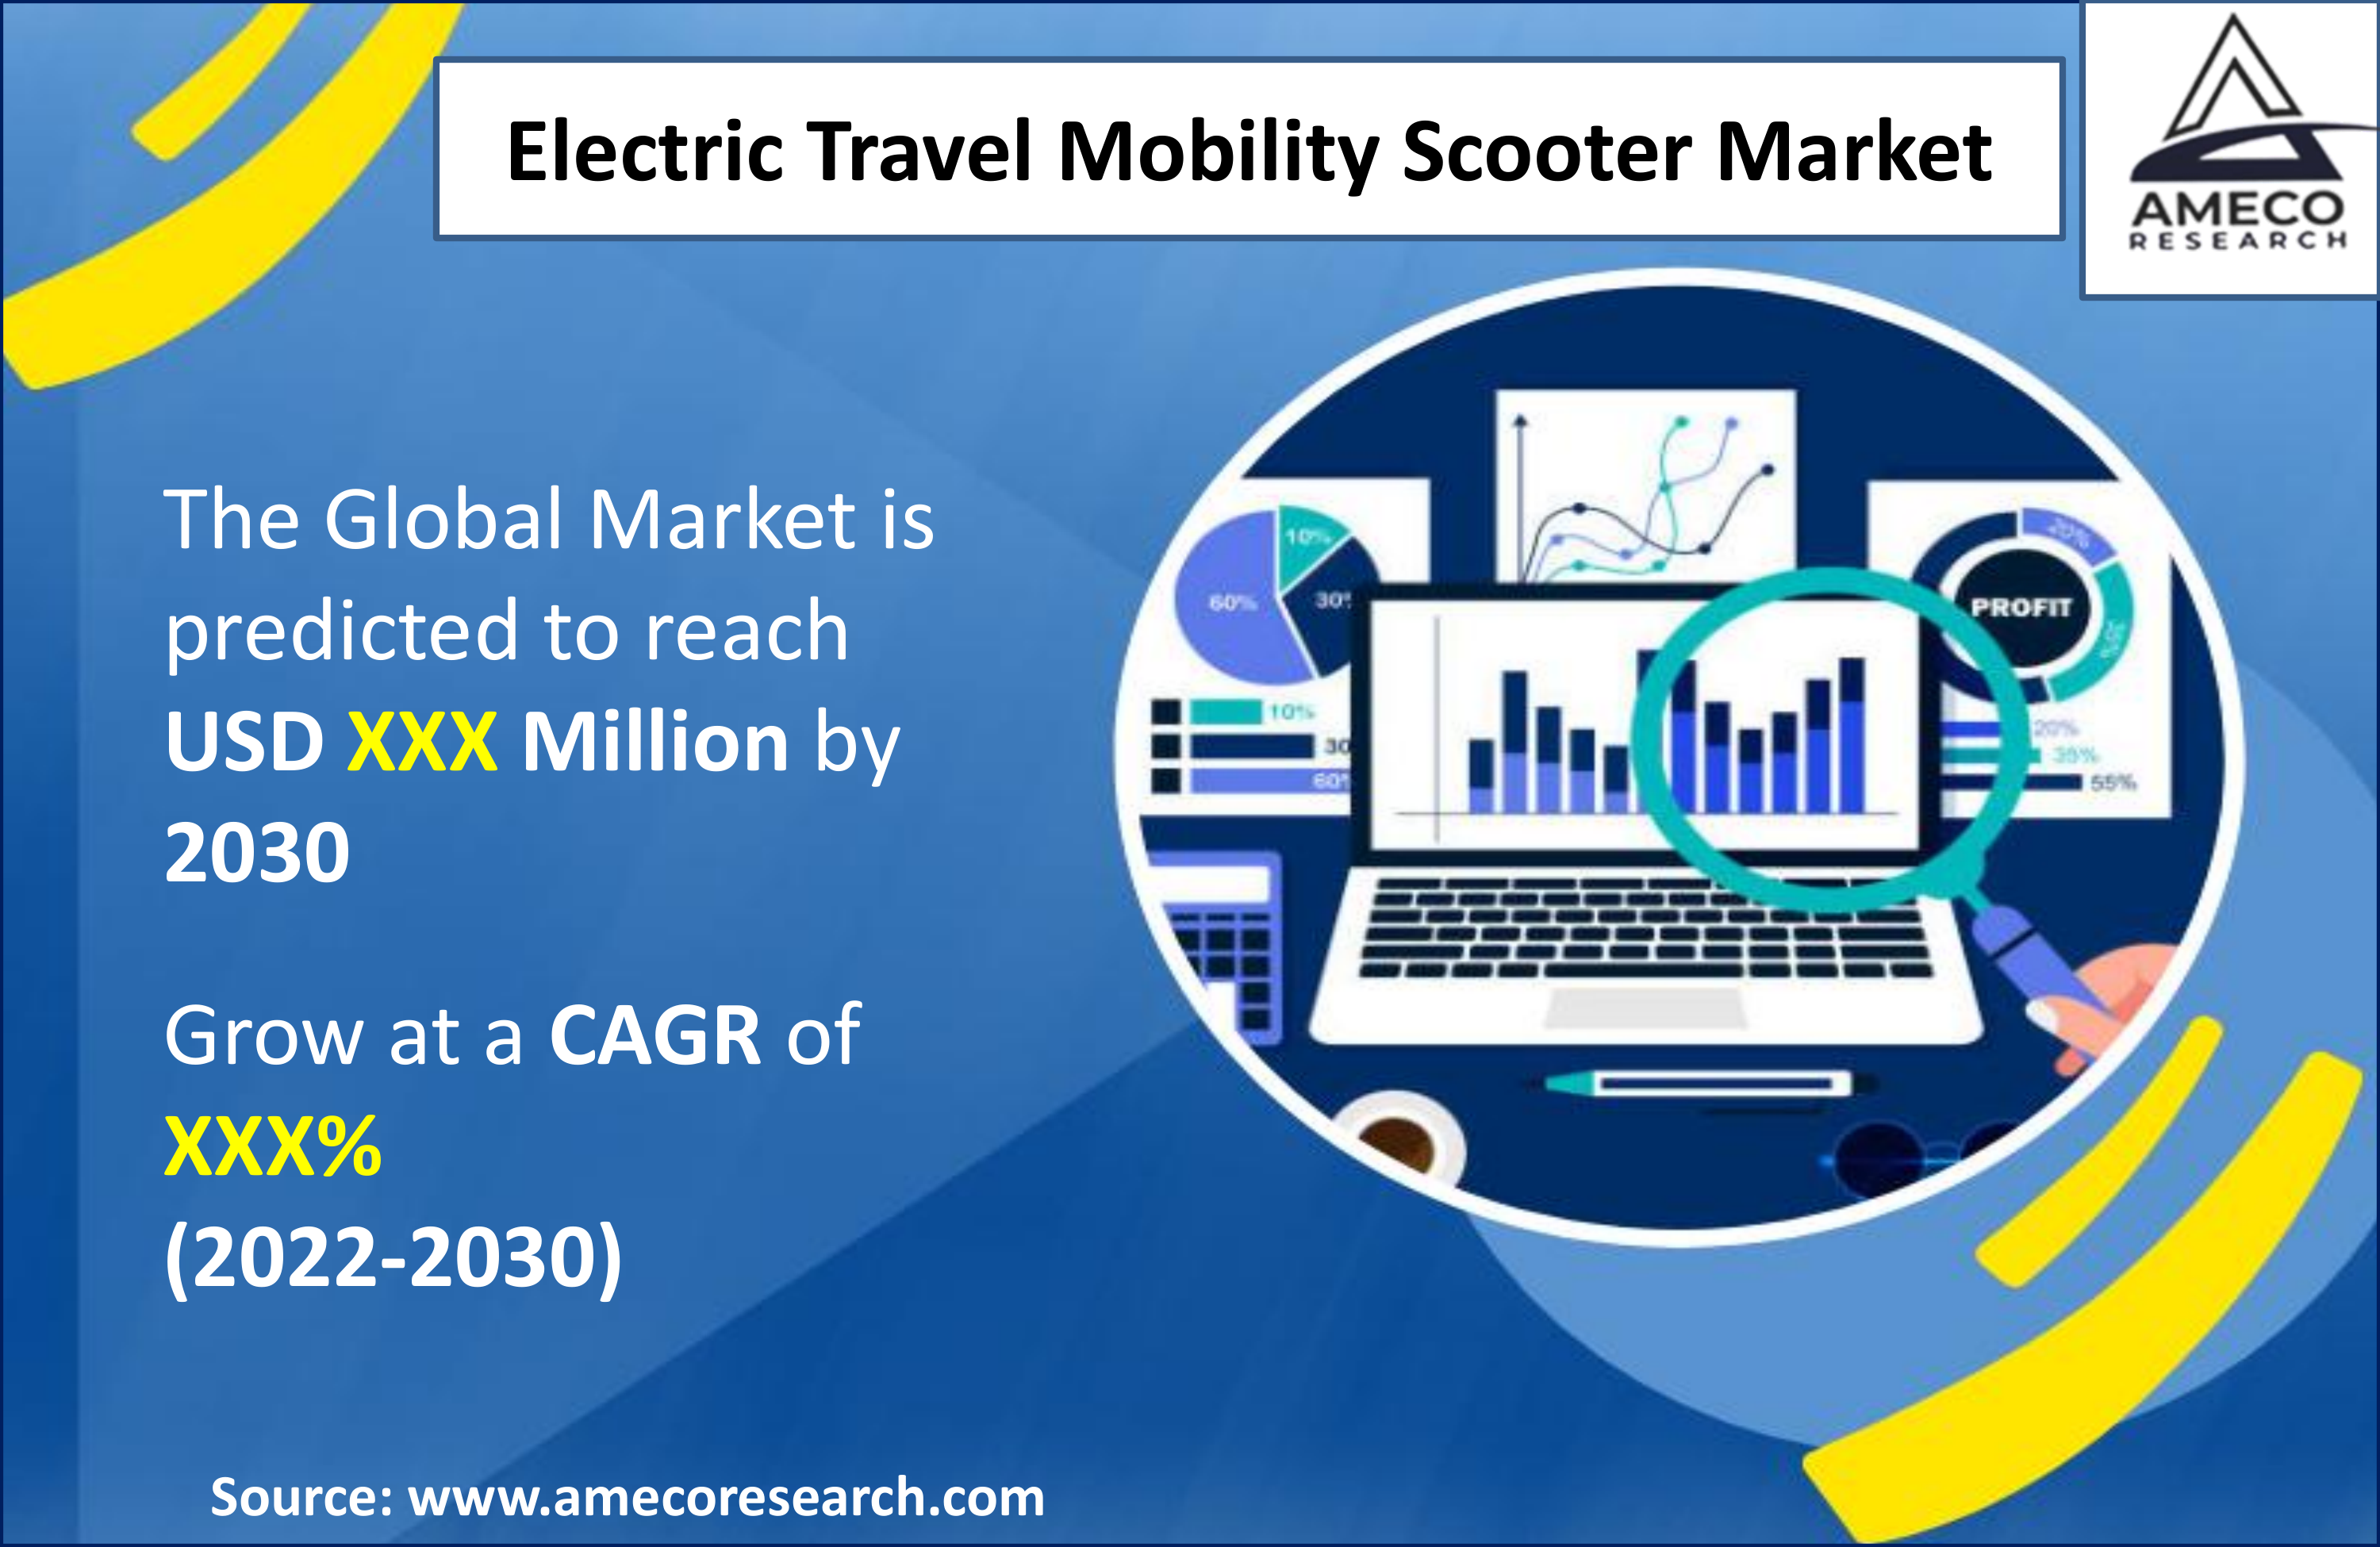 Electric Travel Mobility Scooter Market